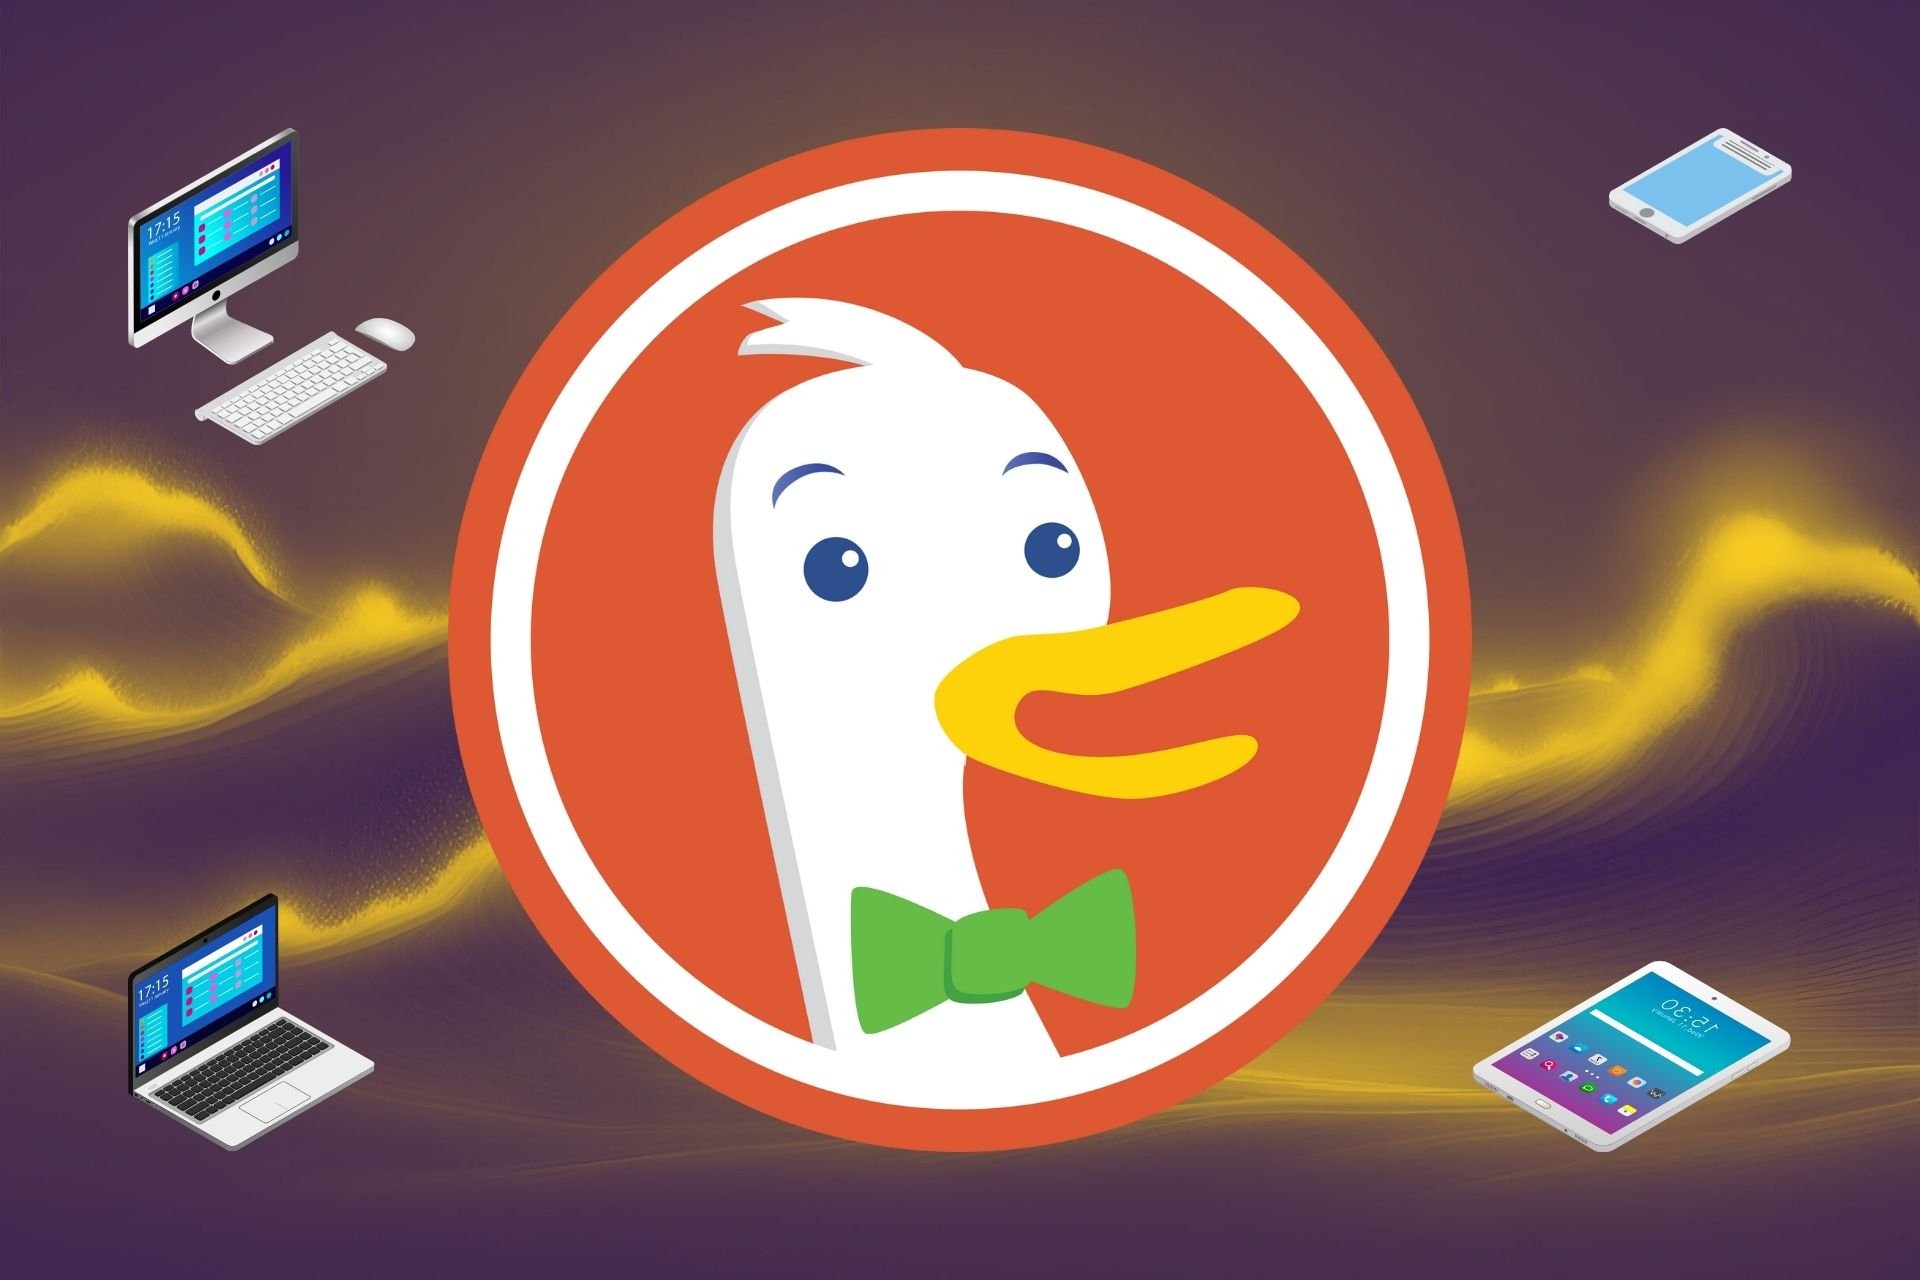 DuckDuckLogo with a phone, a tablet, a desktop and a laptop